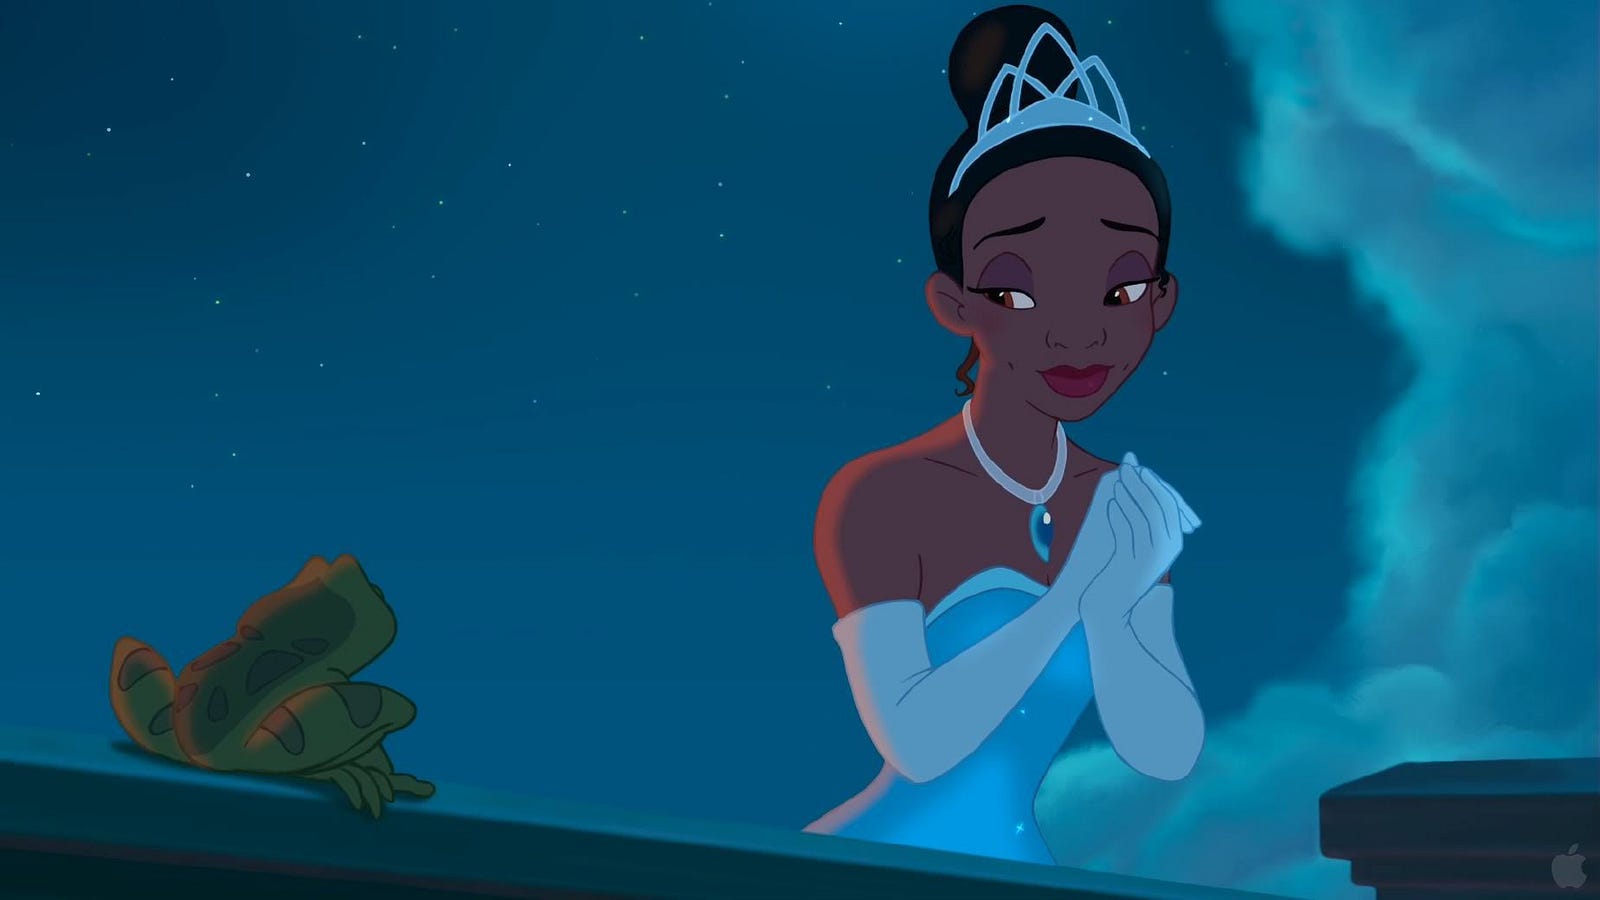 Great Character: Tiana ("The Princess and the Frog")